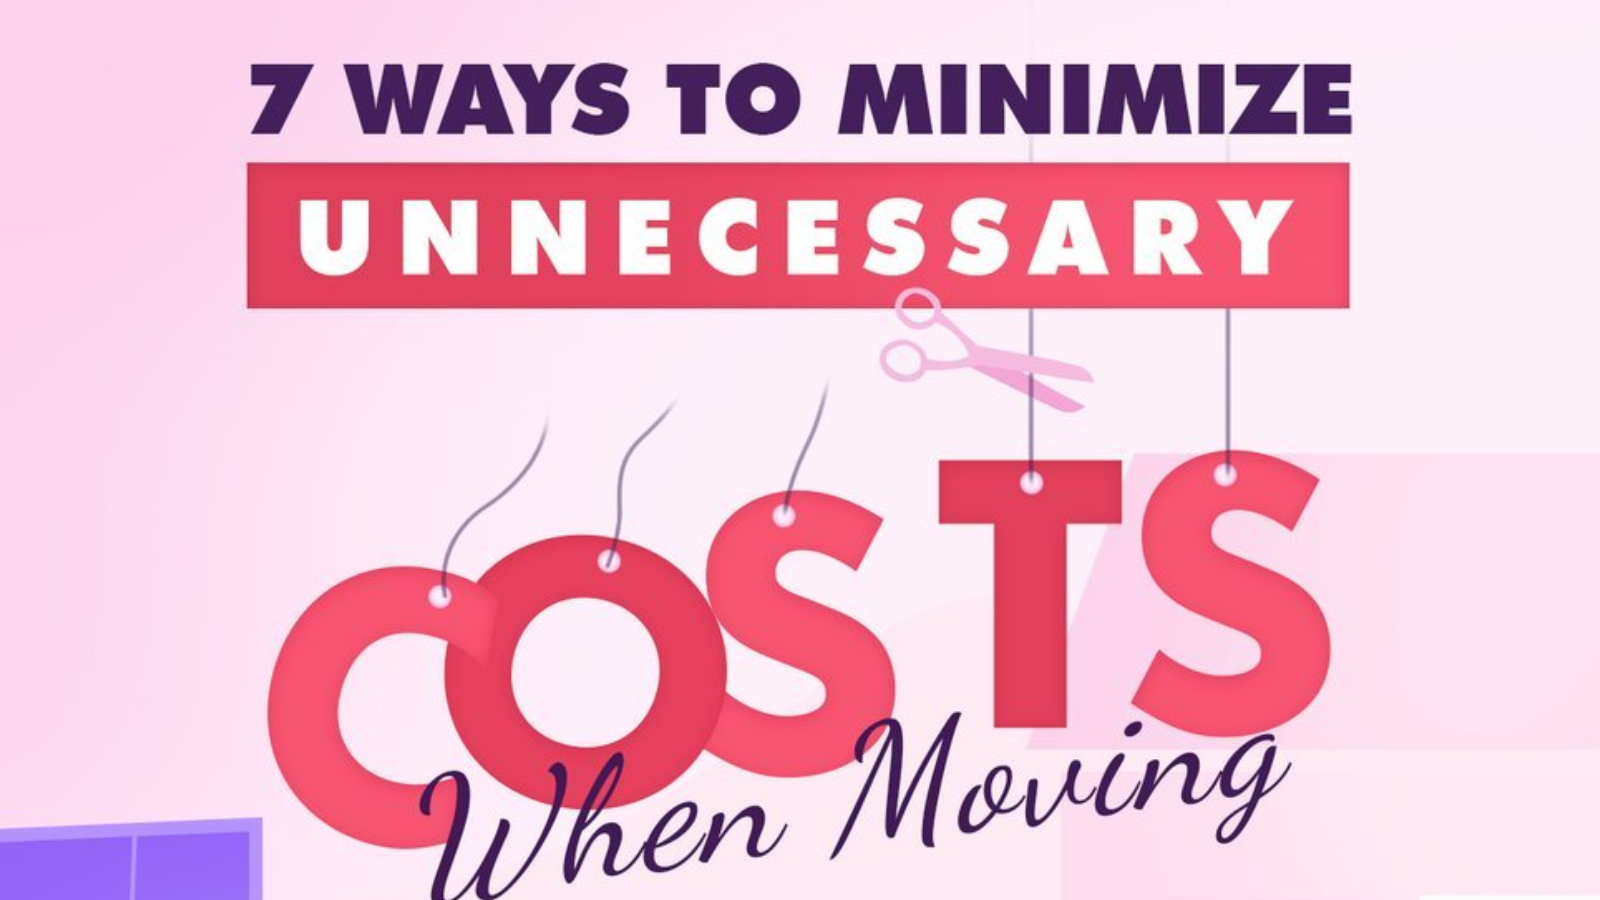 7 Ways To Minimize Unnecessary Costs When Moving